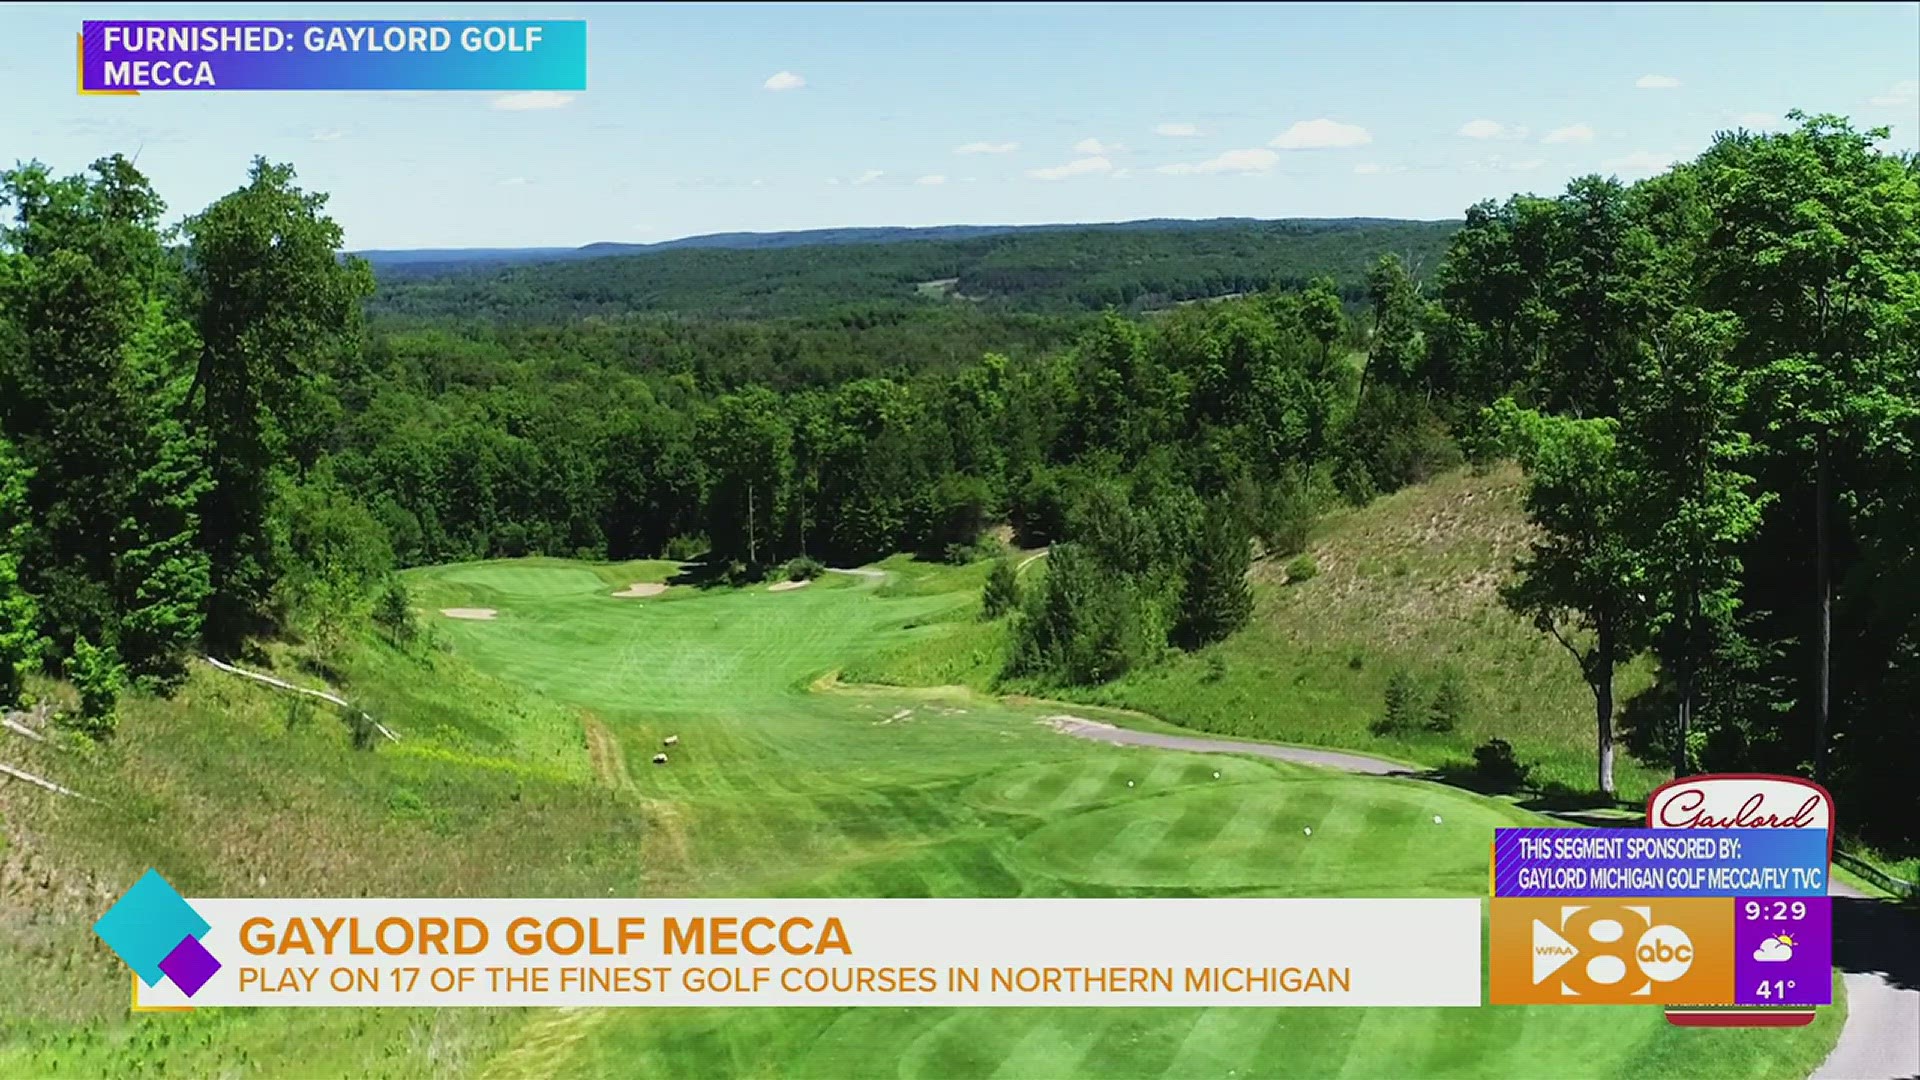 This segment is sponsored by Gaylord Michigan Golf Mecca/Fly TVC.